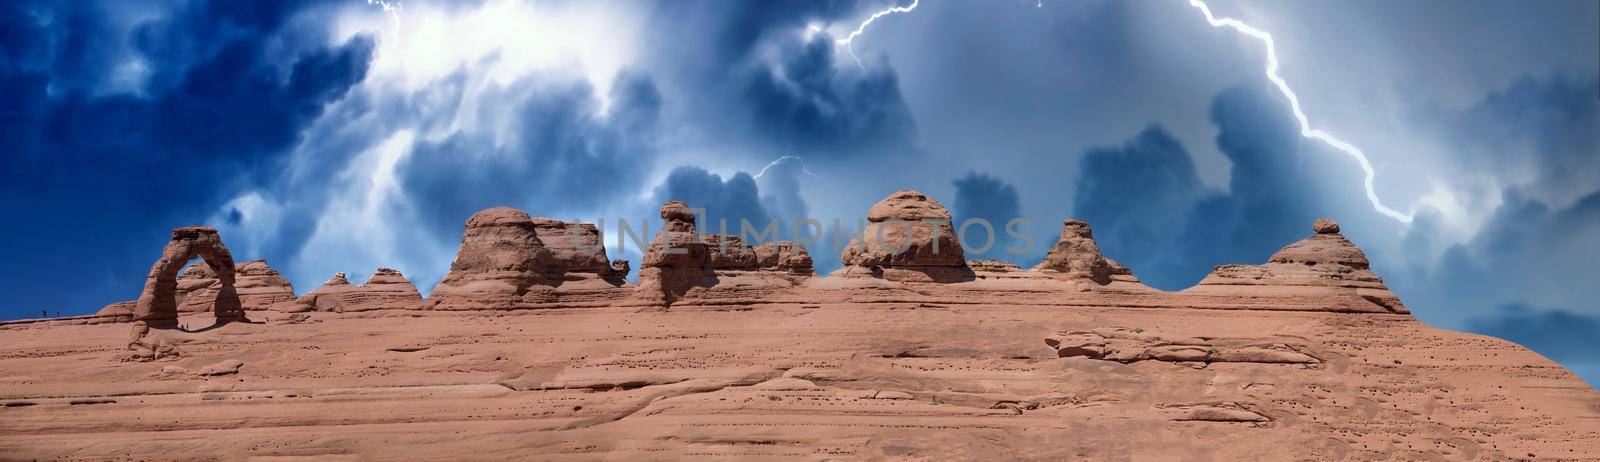 Delicate Arch panoramic view, Arches National Park. High resolution image of rock formations during a storm by jovannig